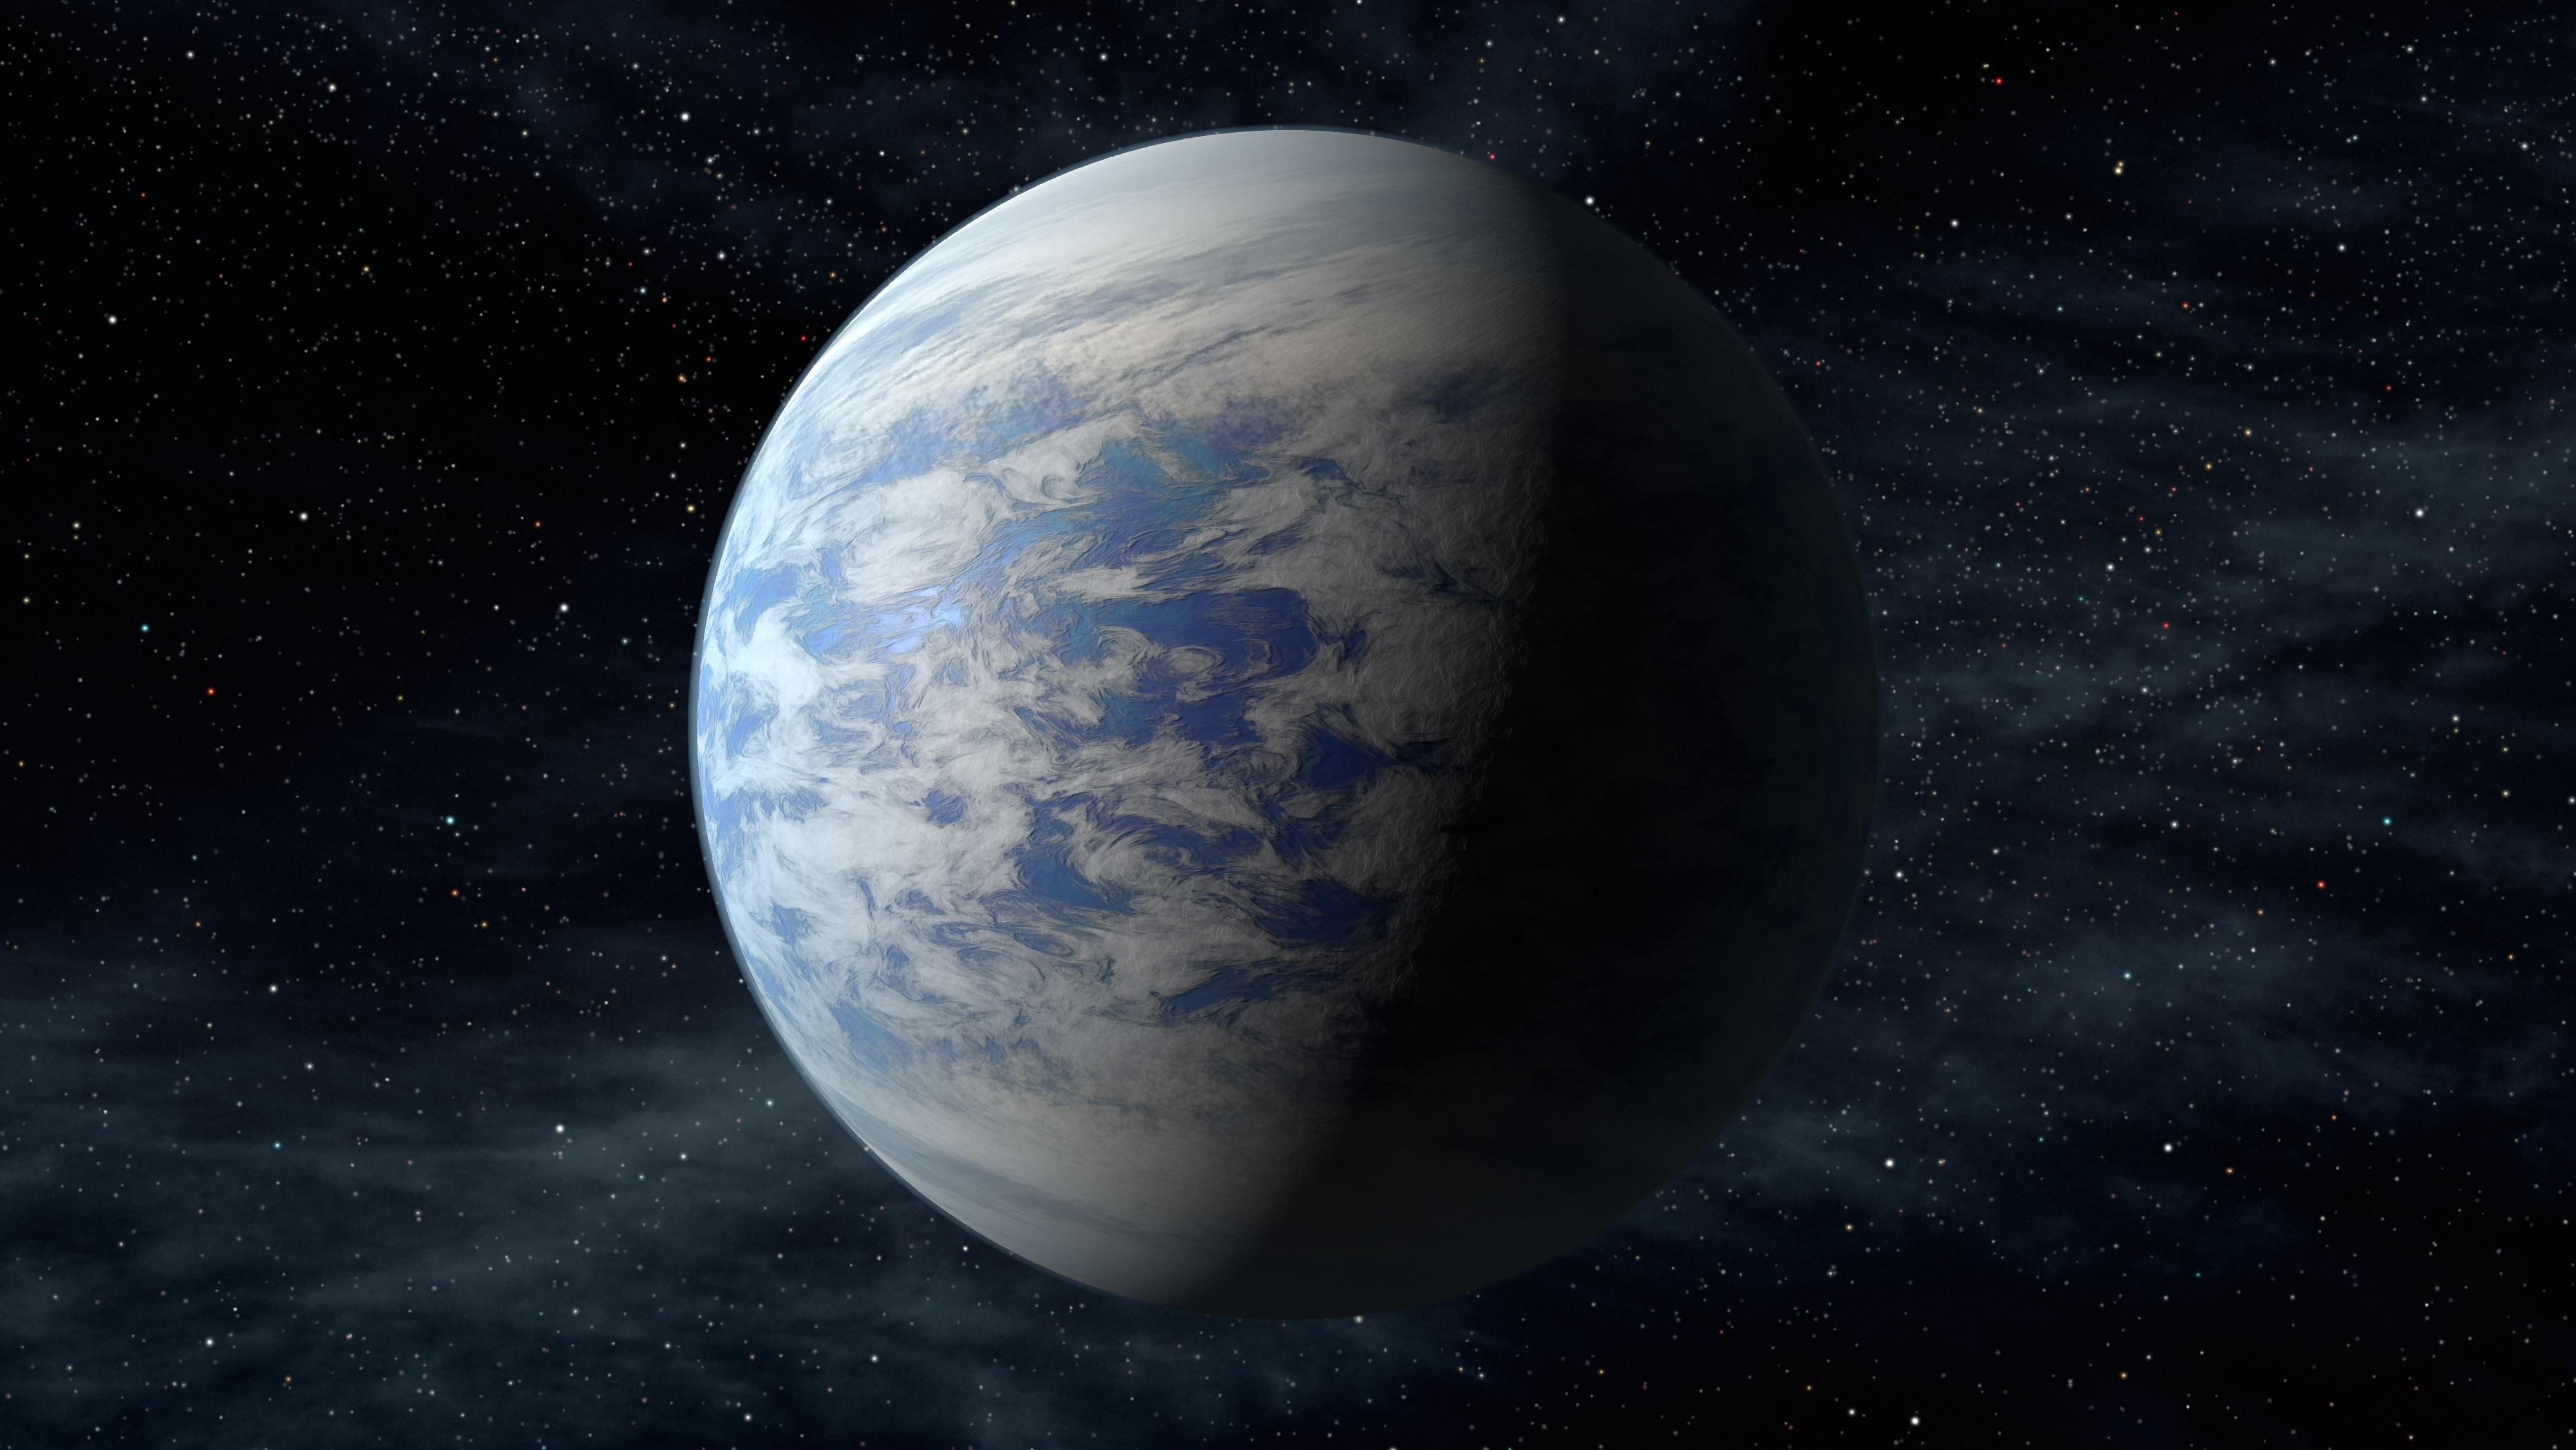 an earth-like planet with clouds floating on its surface, half of it bathed in shadow